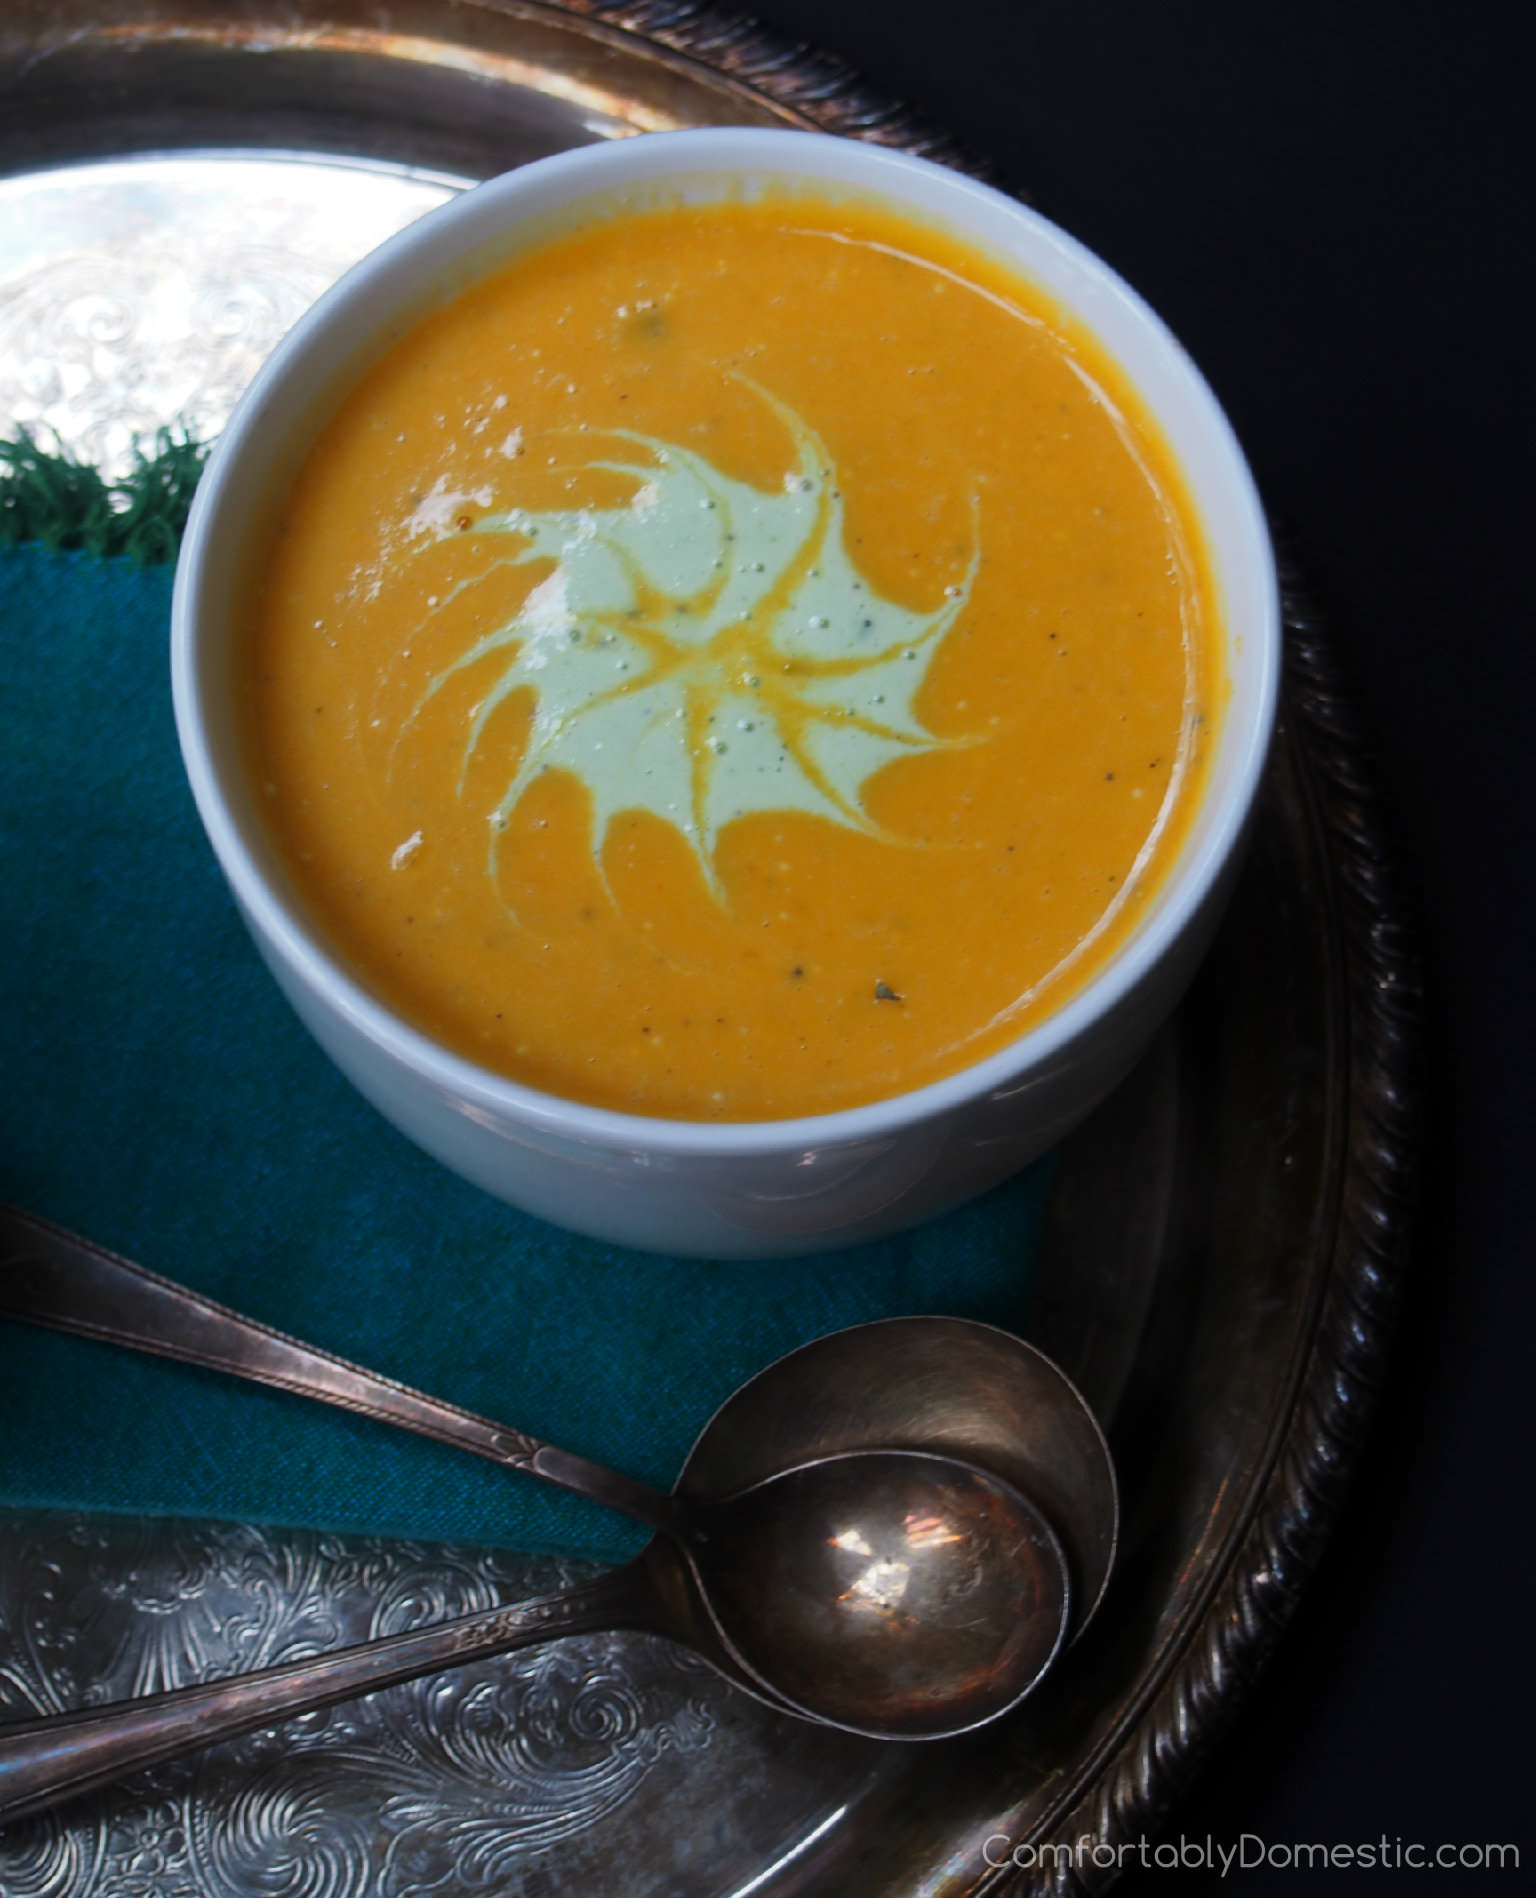 This spicy butternut squash bisque recipe blends roasted butternut squash with onion, garlic, and a bit of spice, creating velvety soup with a spicy finish. | ComfortablyDomestic.com